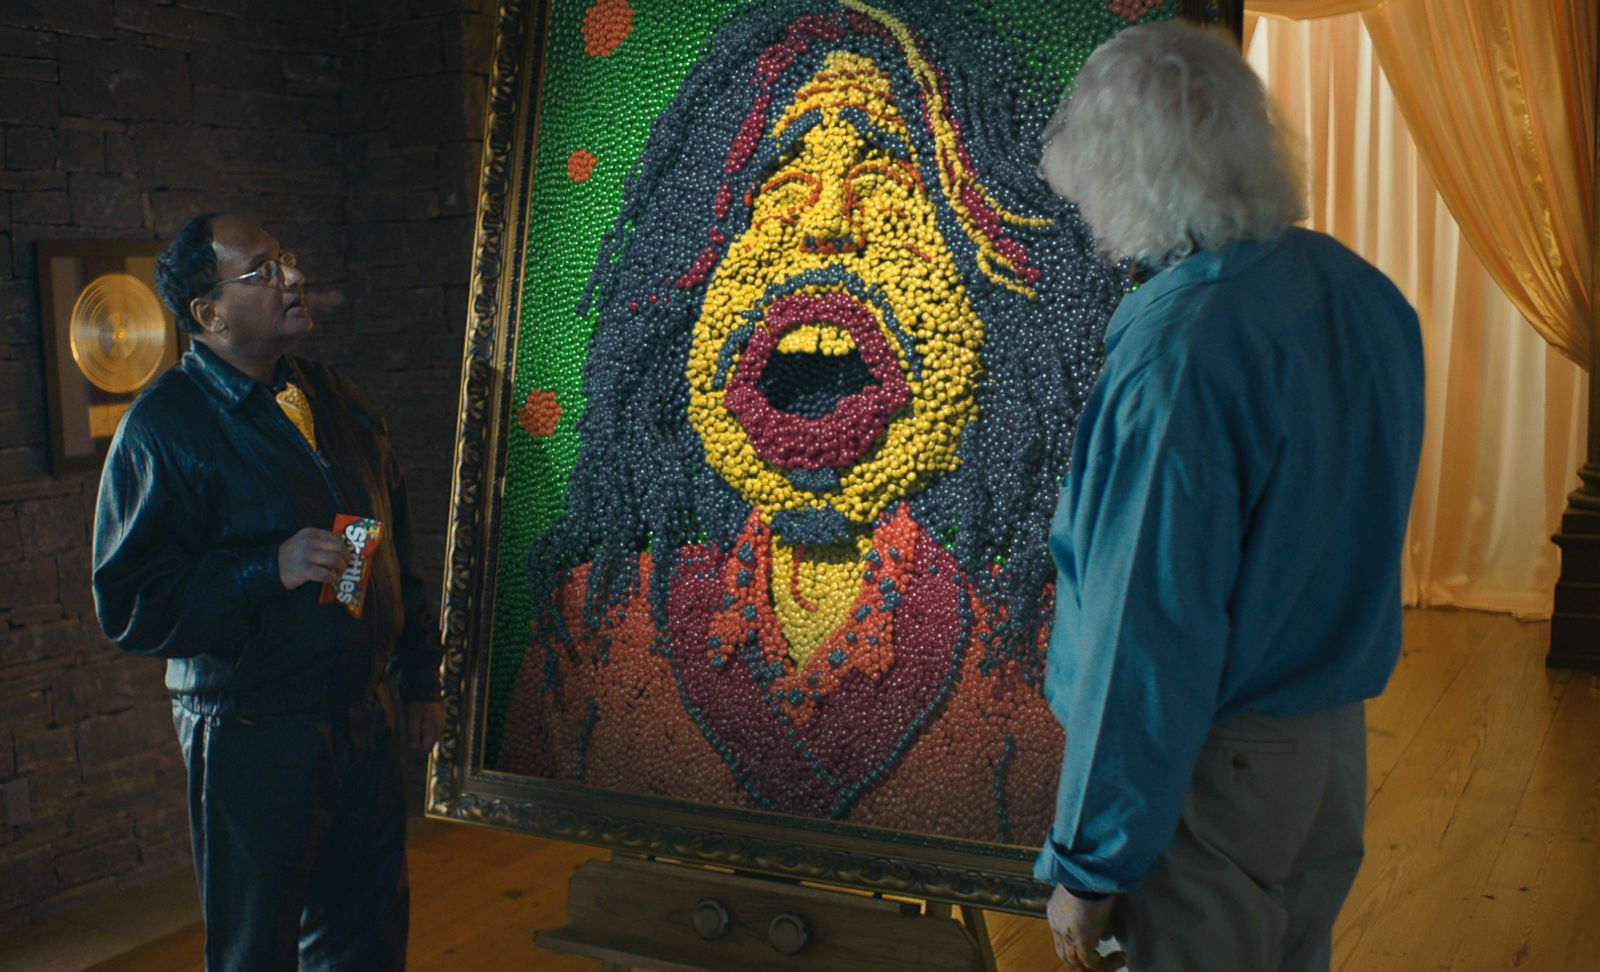 Co. shows a Skittles portrait of Aerosmith front man Steven Tyler being unv...